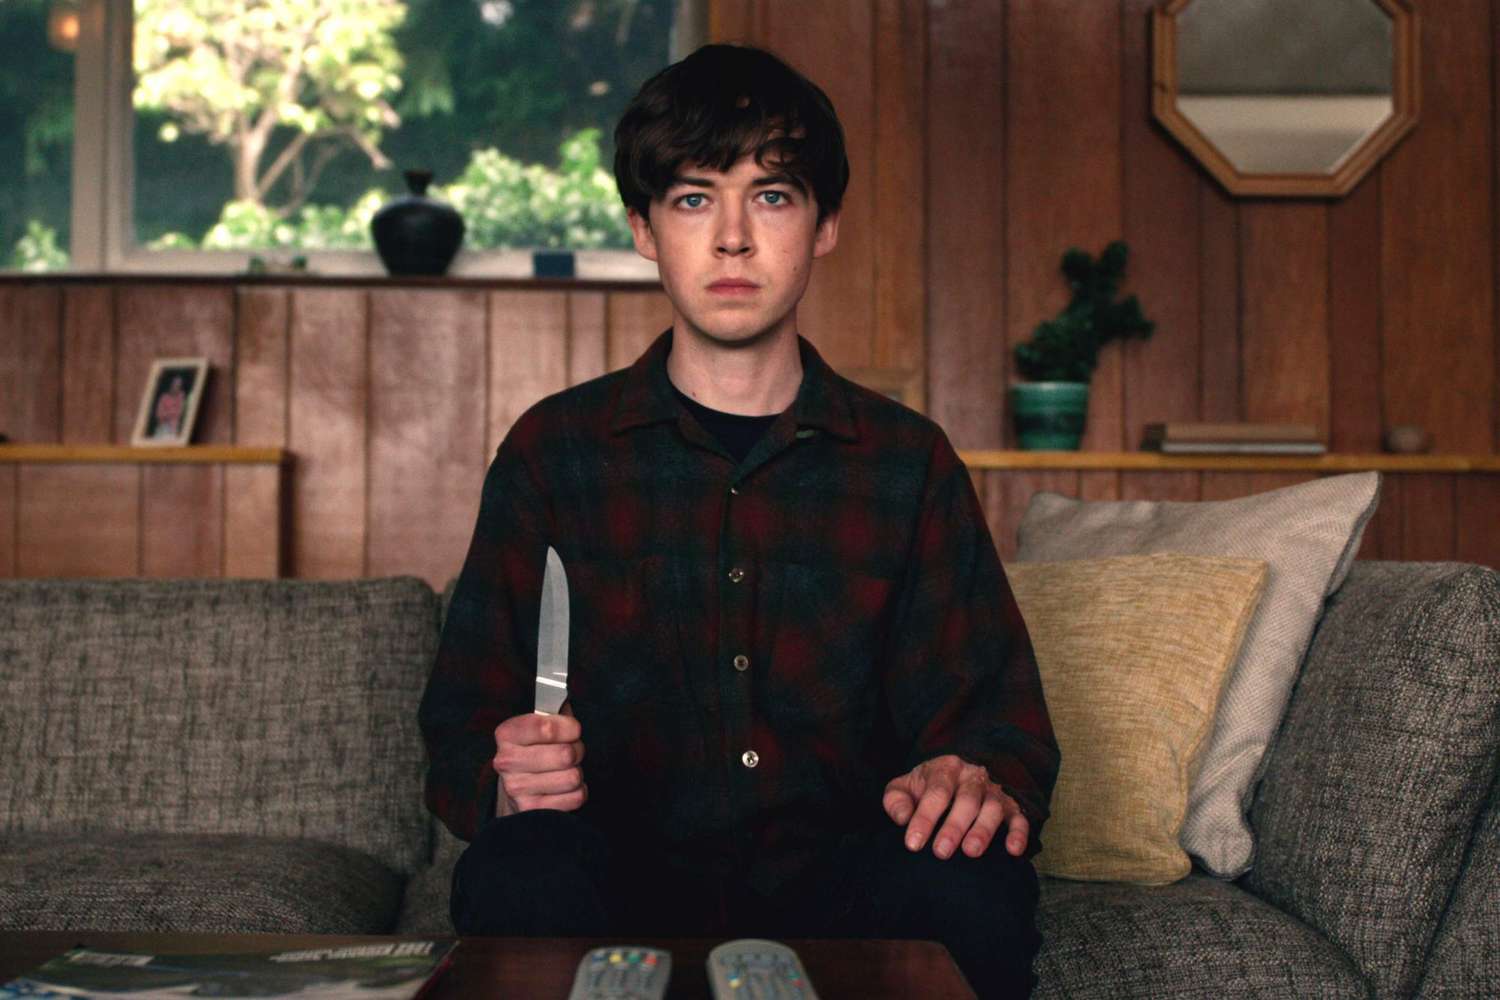 Best Comedy Lead Actor: Alex Lawther - The End of the F***ing World&nbsp;(Netflix)